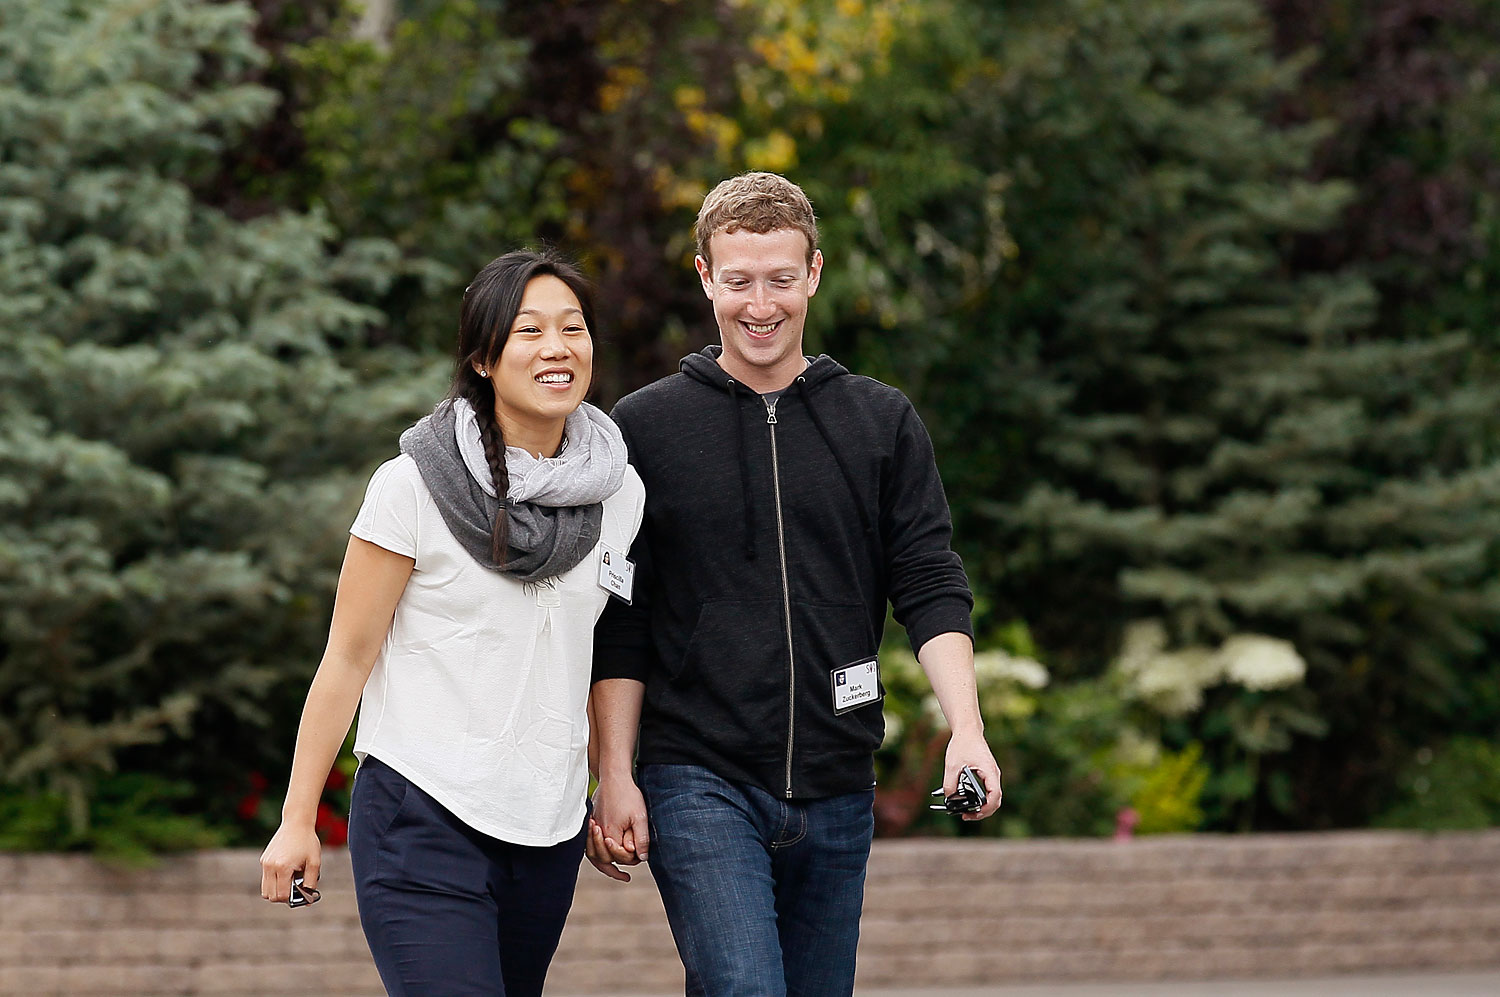 Facebook CEO Mark Zuckerberg walks with his wife Priscilla Chan at the annual Allen and Co. conference at the Sun Valley, Idaho Resort, July 11, 2013. (Rick Wilking—Reuters)